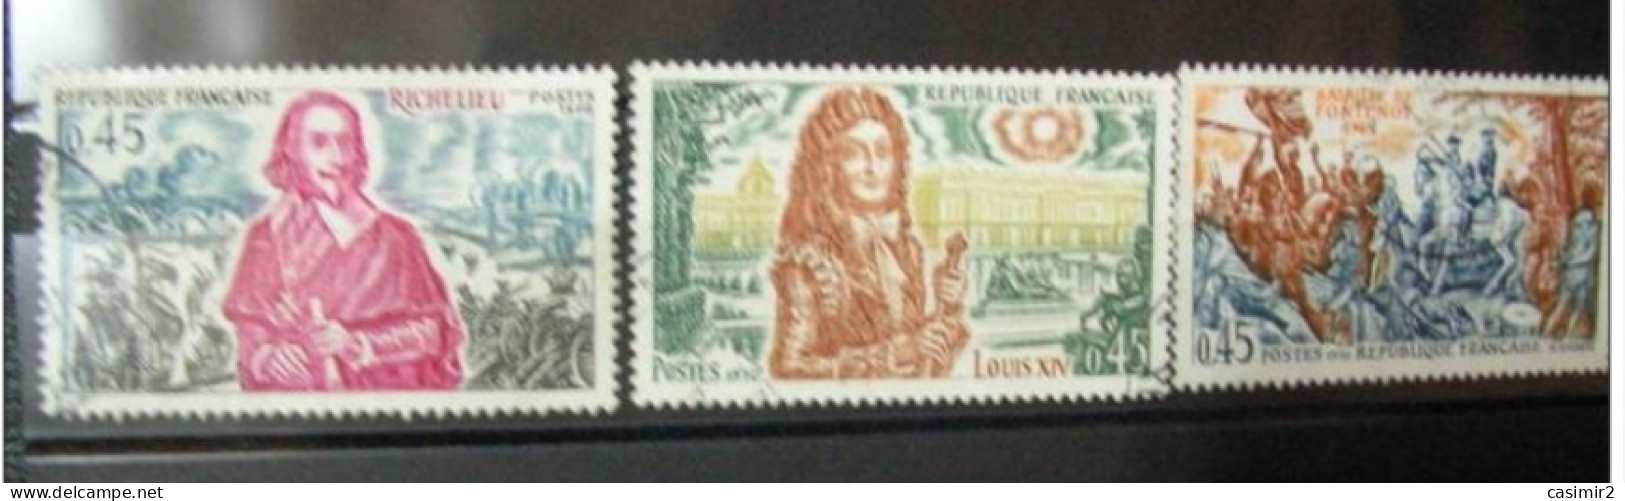 TIMBRE OBLITERE   YVERT N° 1655.1657 - Used Stamps